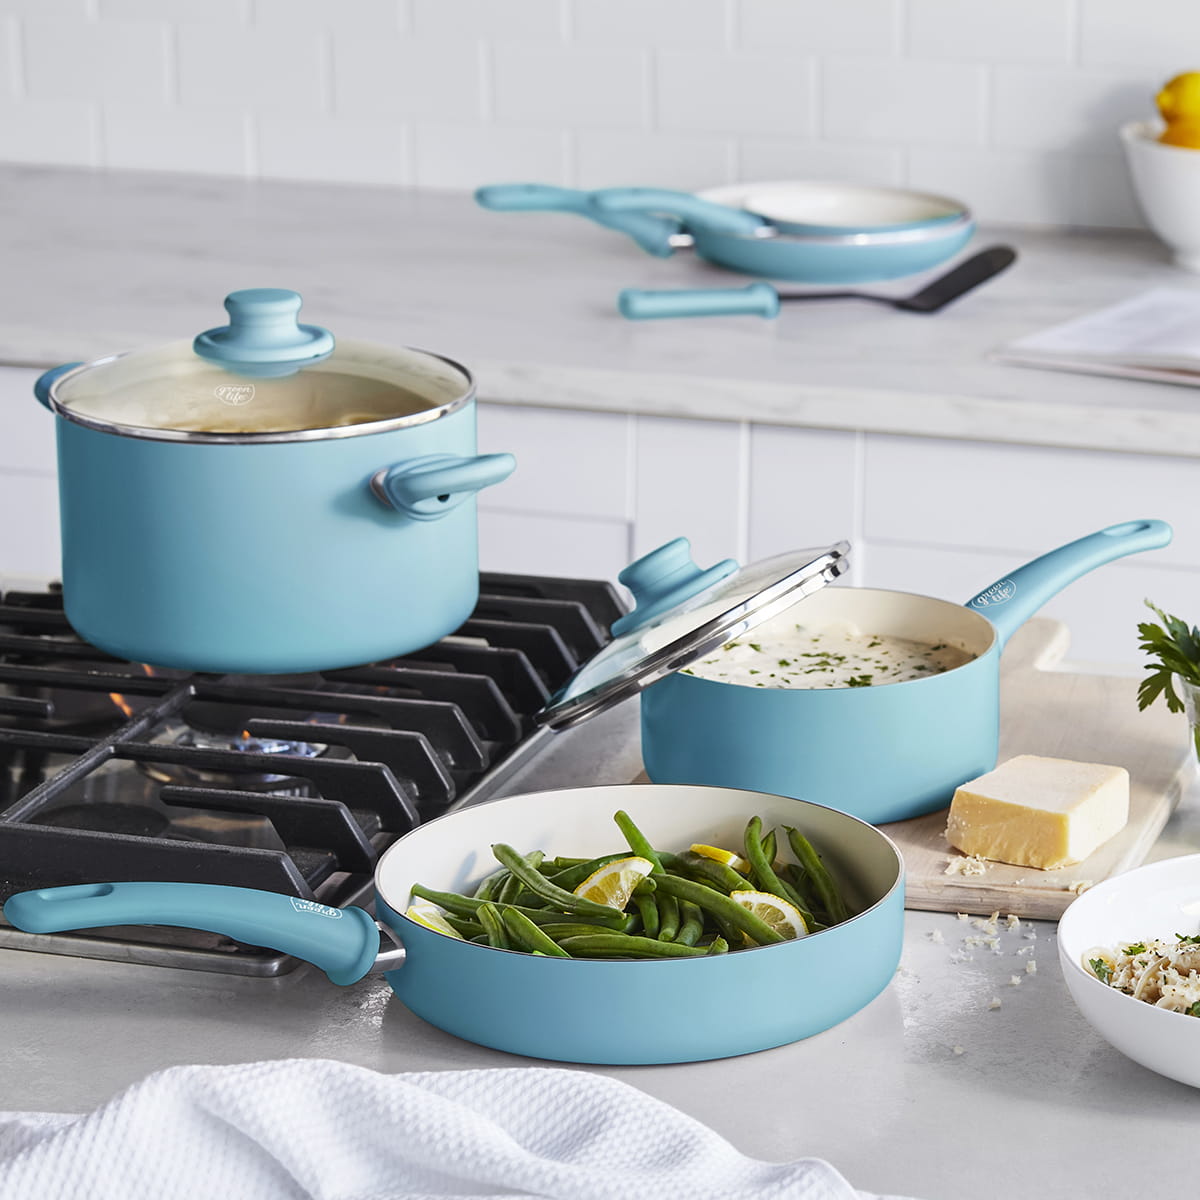 GreenLife 18-Piece Soft Grip Toxin-Free Healthy Ceramic Non-Stick Cookware  Set, Turquoise, Dishwasher Safe